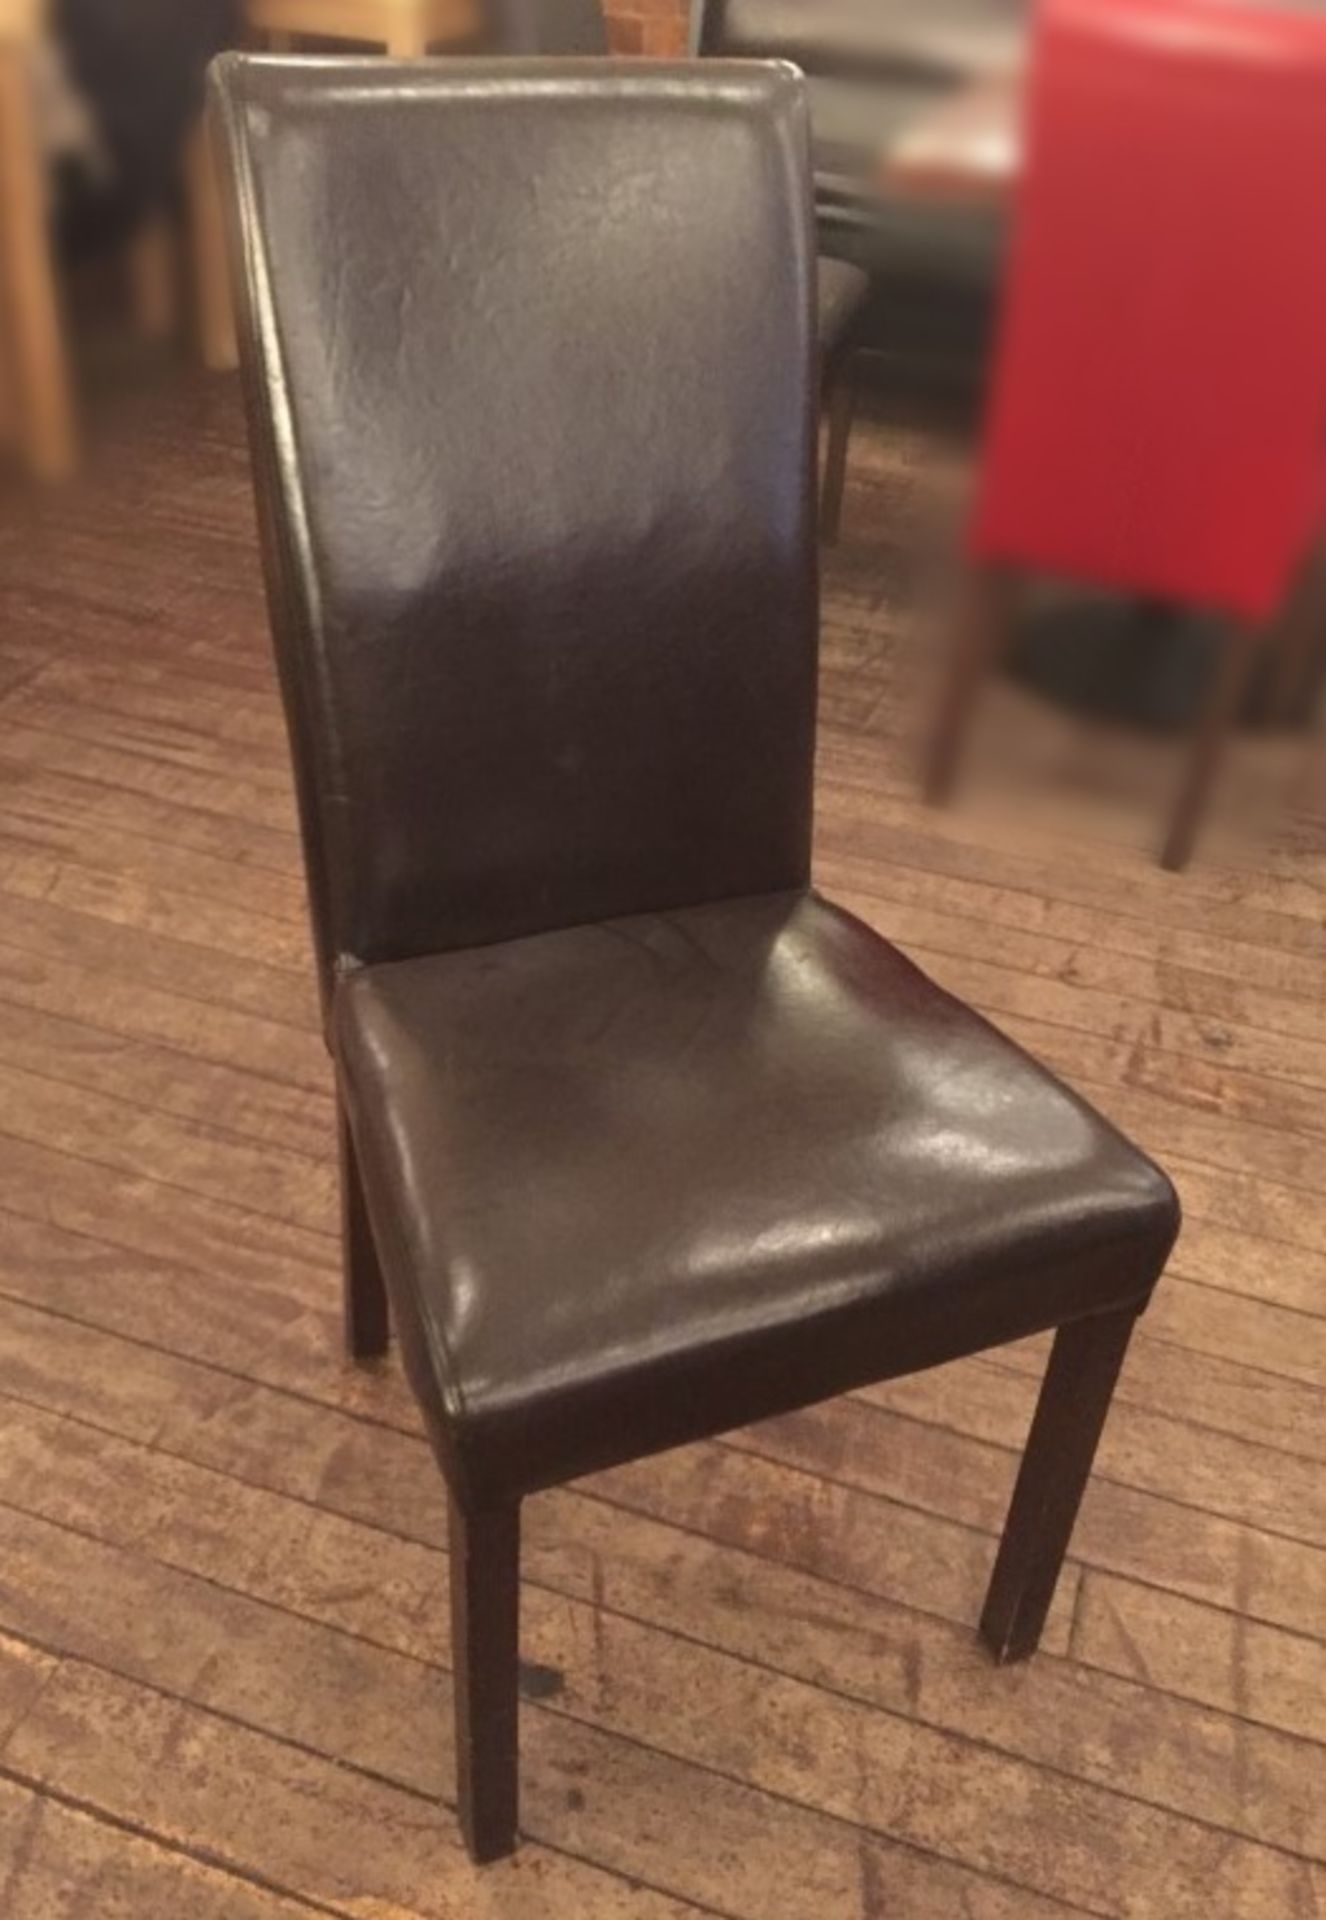 2 x Brown Faux Leather Dining Chairs - Seating Dimensions: 47 x 38cm x Height 100cm, Seat Height